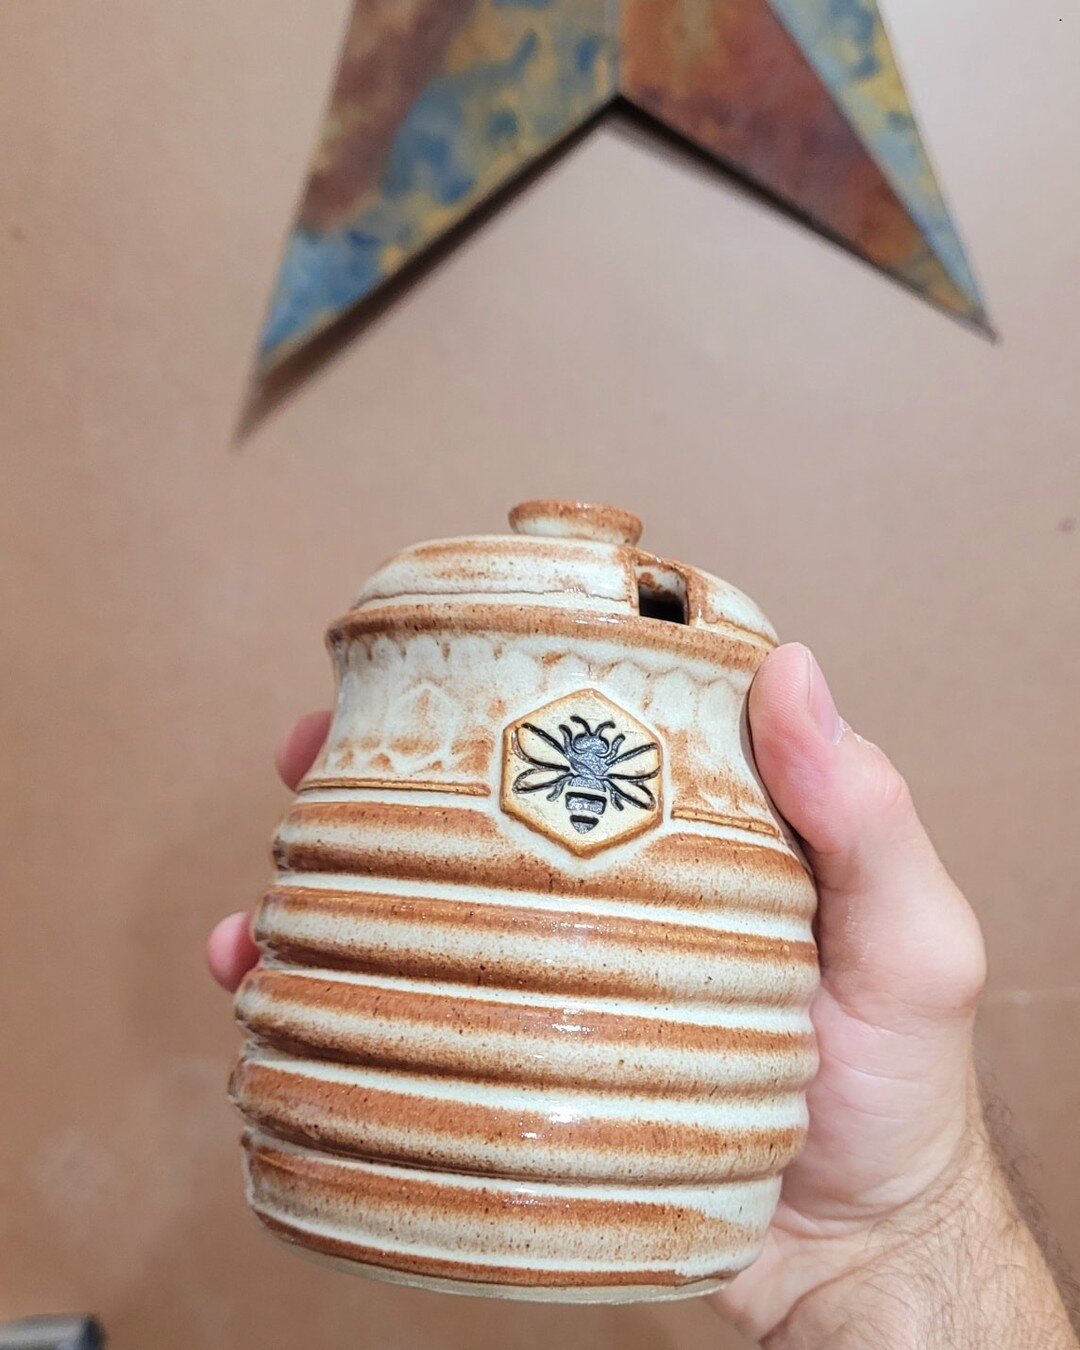 Im super happy with how this commission came out! This honey pot turned out rather nice!

 #wheelthrownpottery #pottery #pinoakpottery #honeypot #honey #bees #notamug